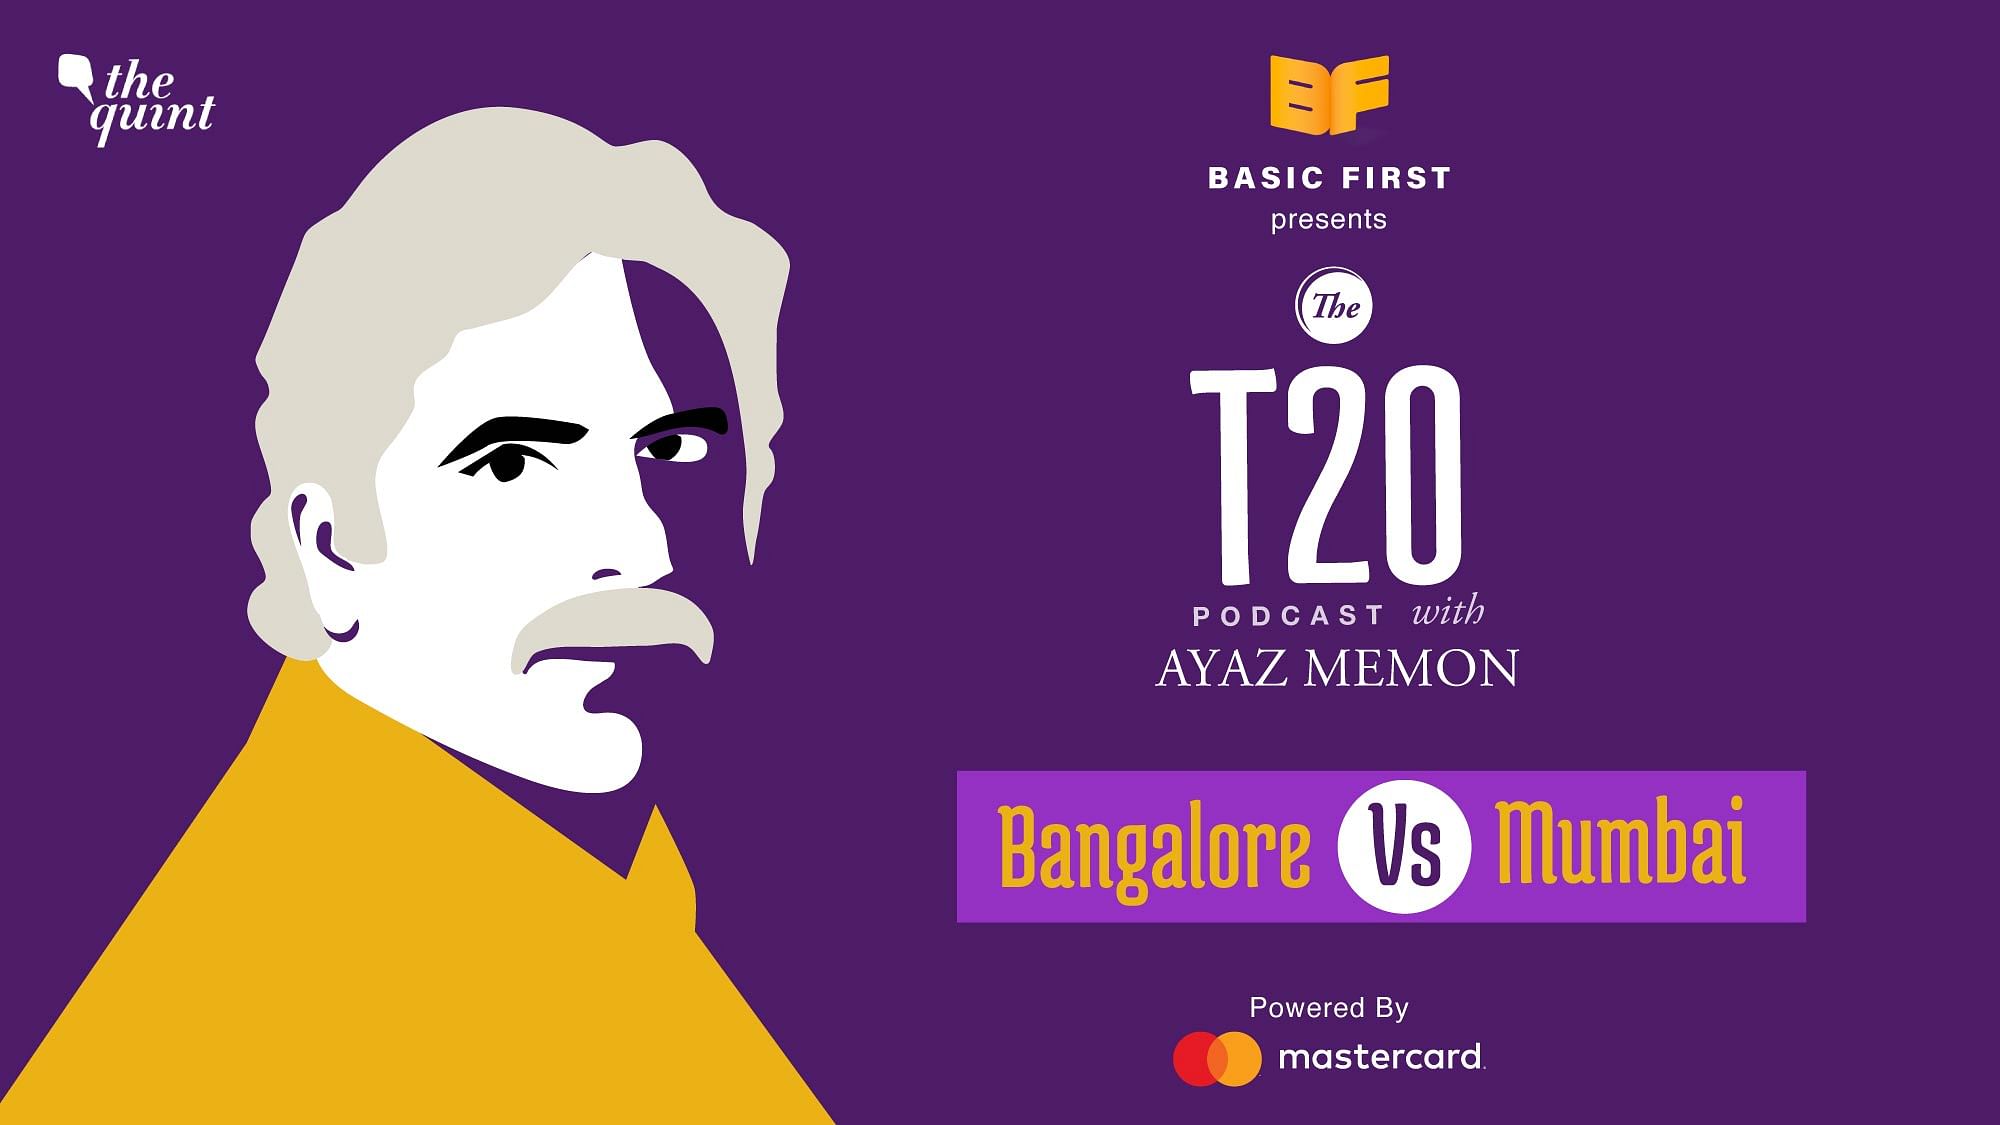 In episode 10 of The T20 Podcast, Ayaz Memon and Mendra Dorjey talk about the second Super Over game of the season.